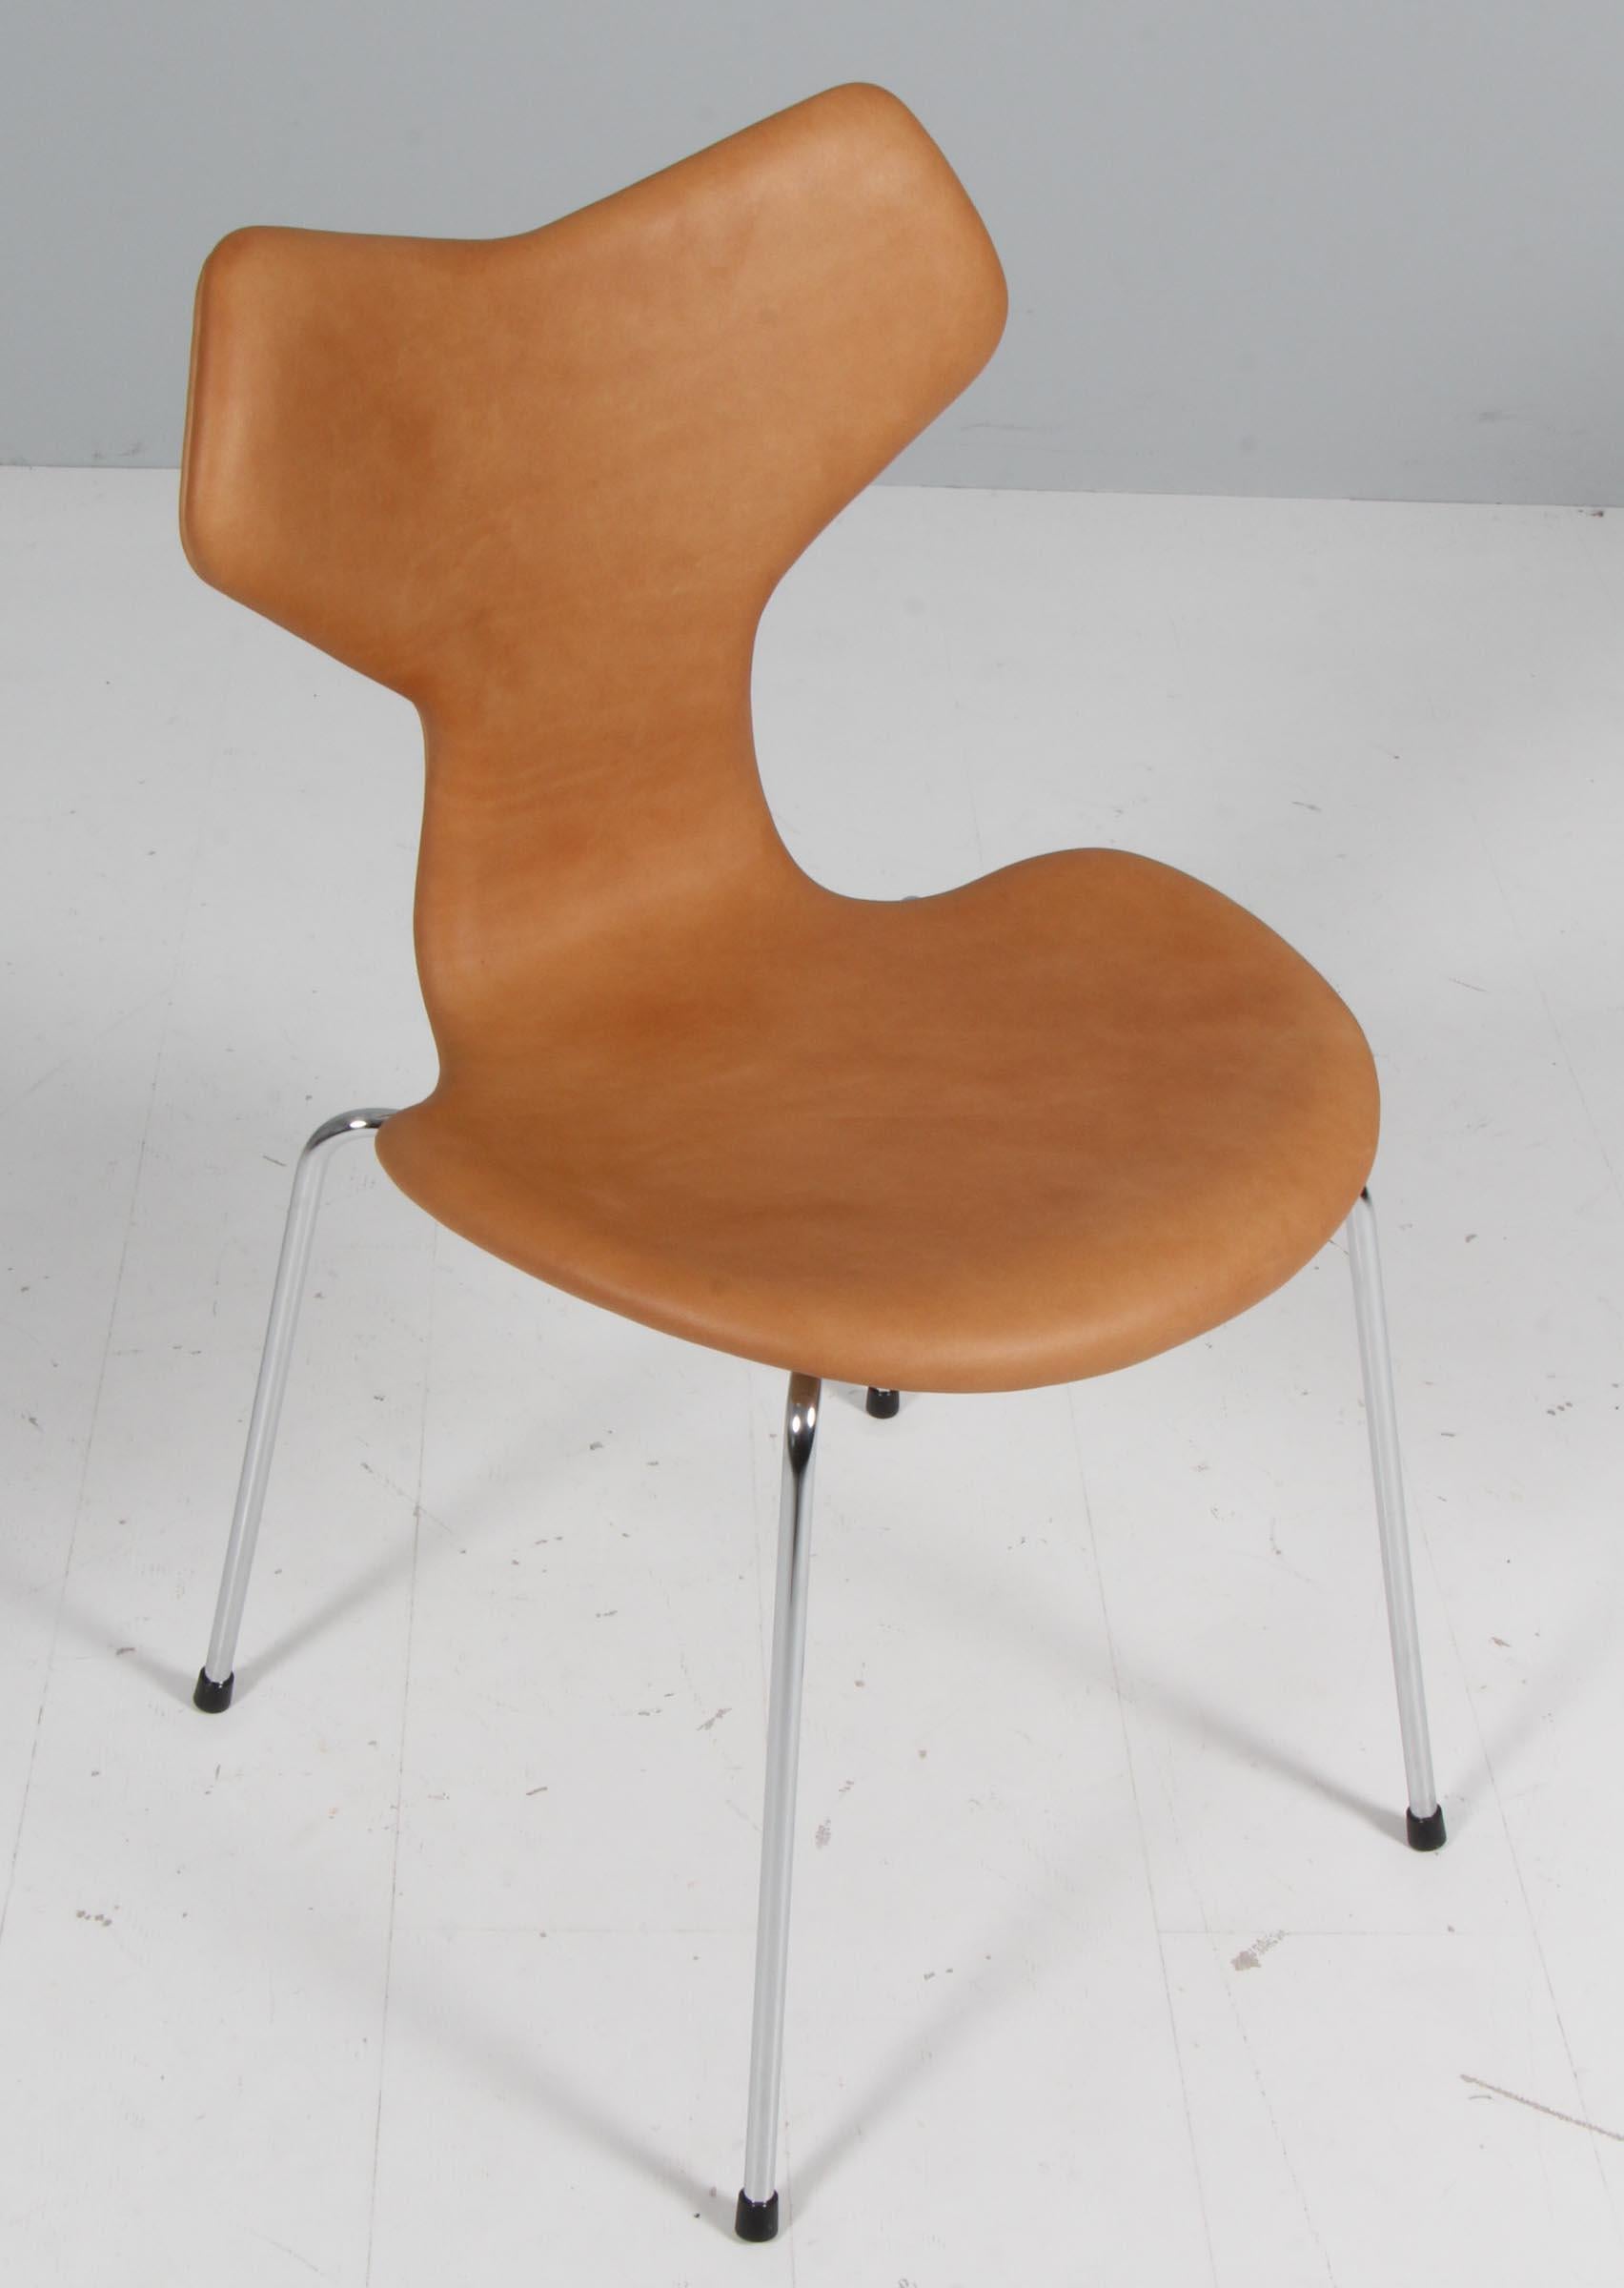 Arne Jacobsen dining chair new upholstered with vintage tan aniline leather.

Base of chrome steel tube.

Model 3130 Grand Prix, made by Fritz Hansen.